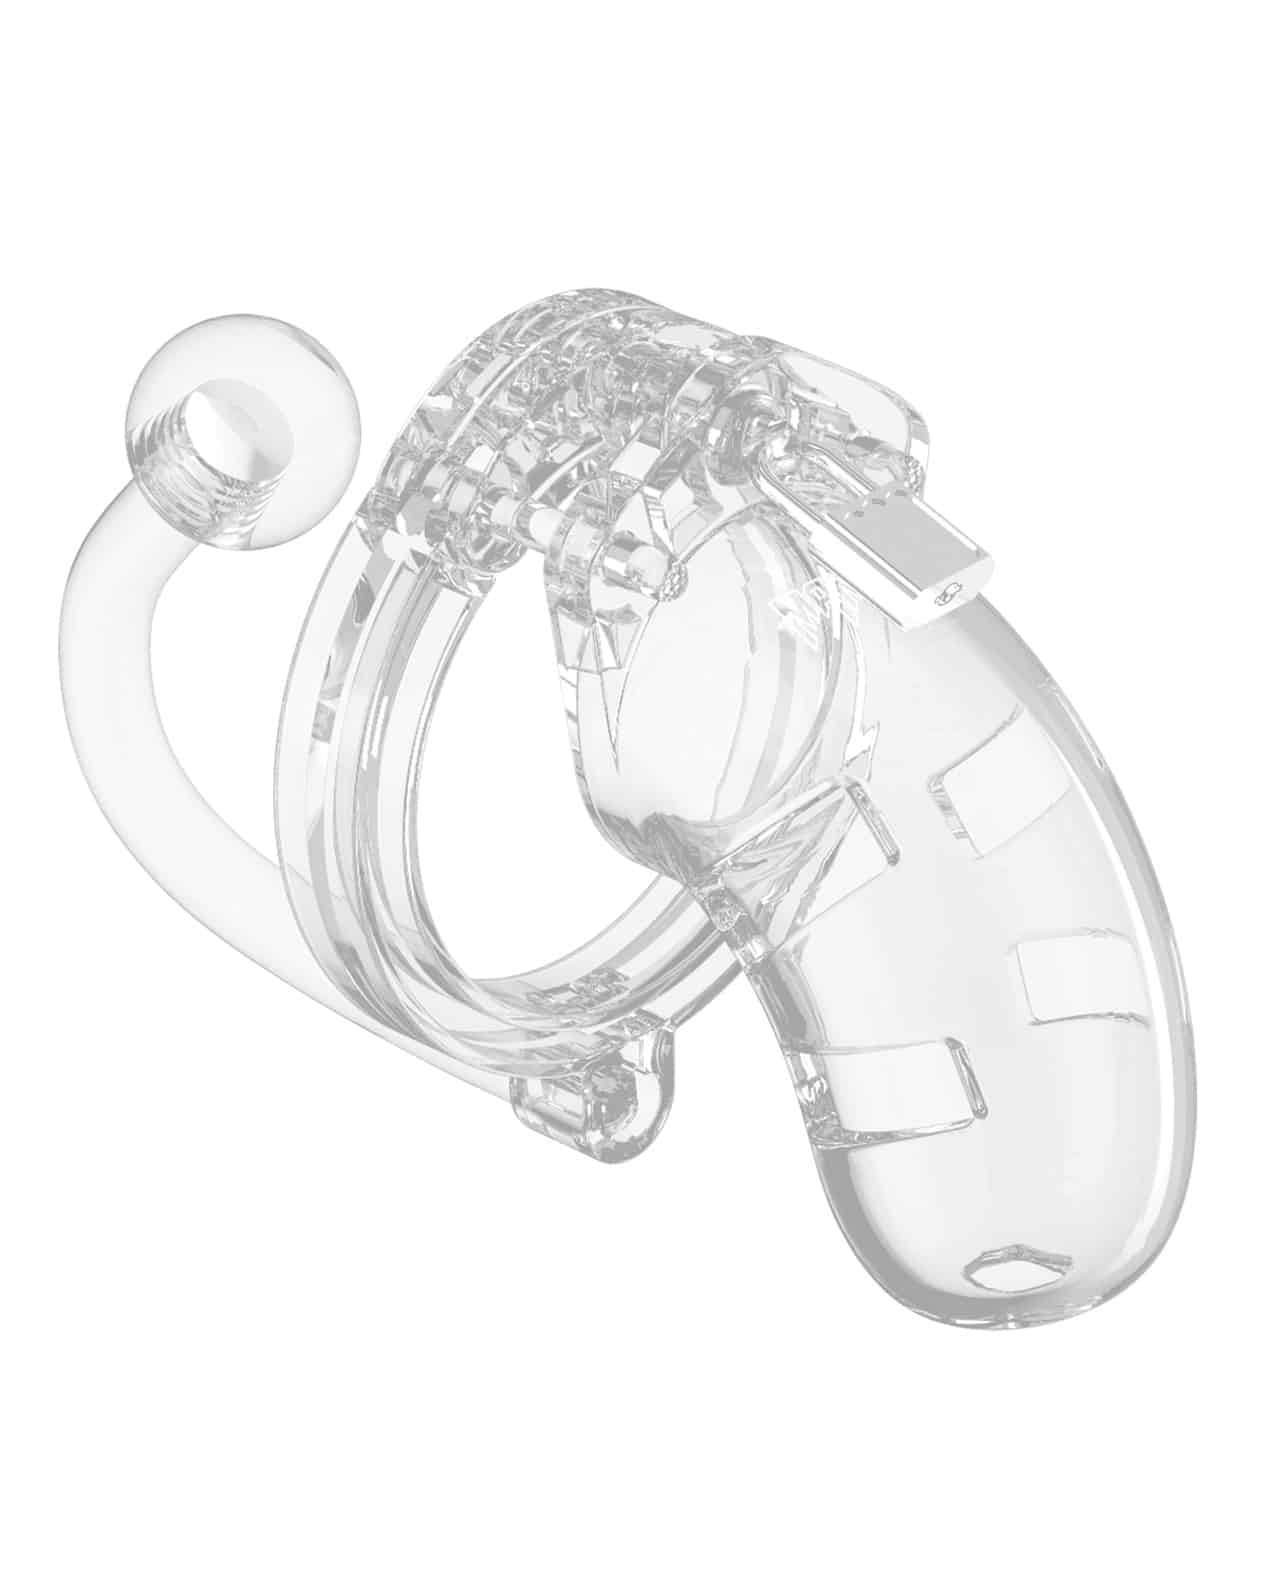 Shots Man Cage Chastity 3.5" Cock Cage with Model 10 Clear Sex Toy